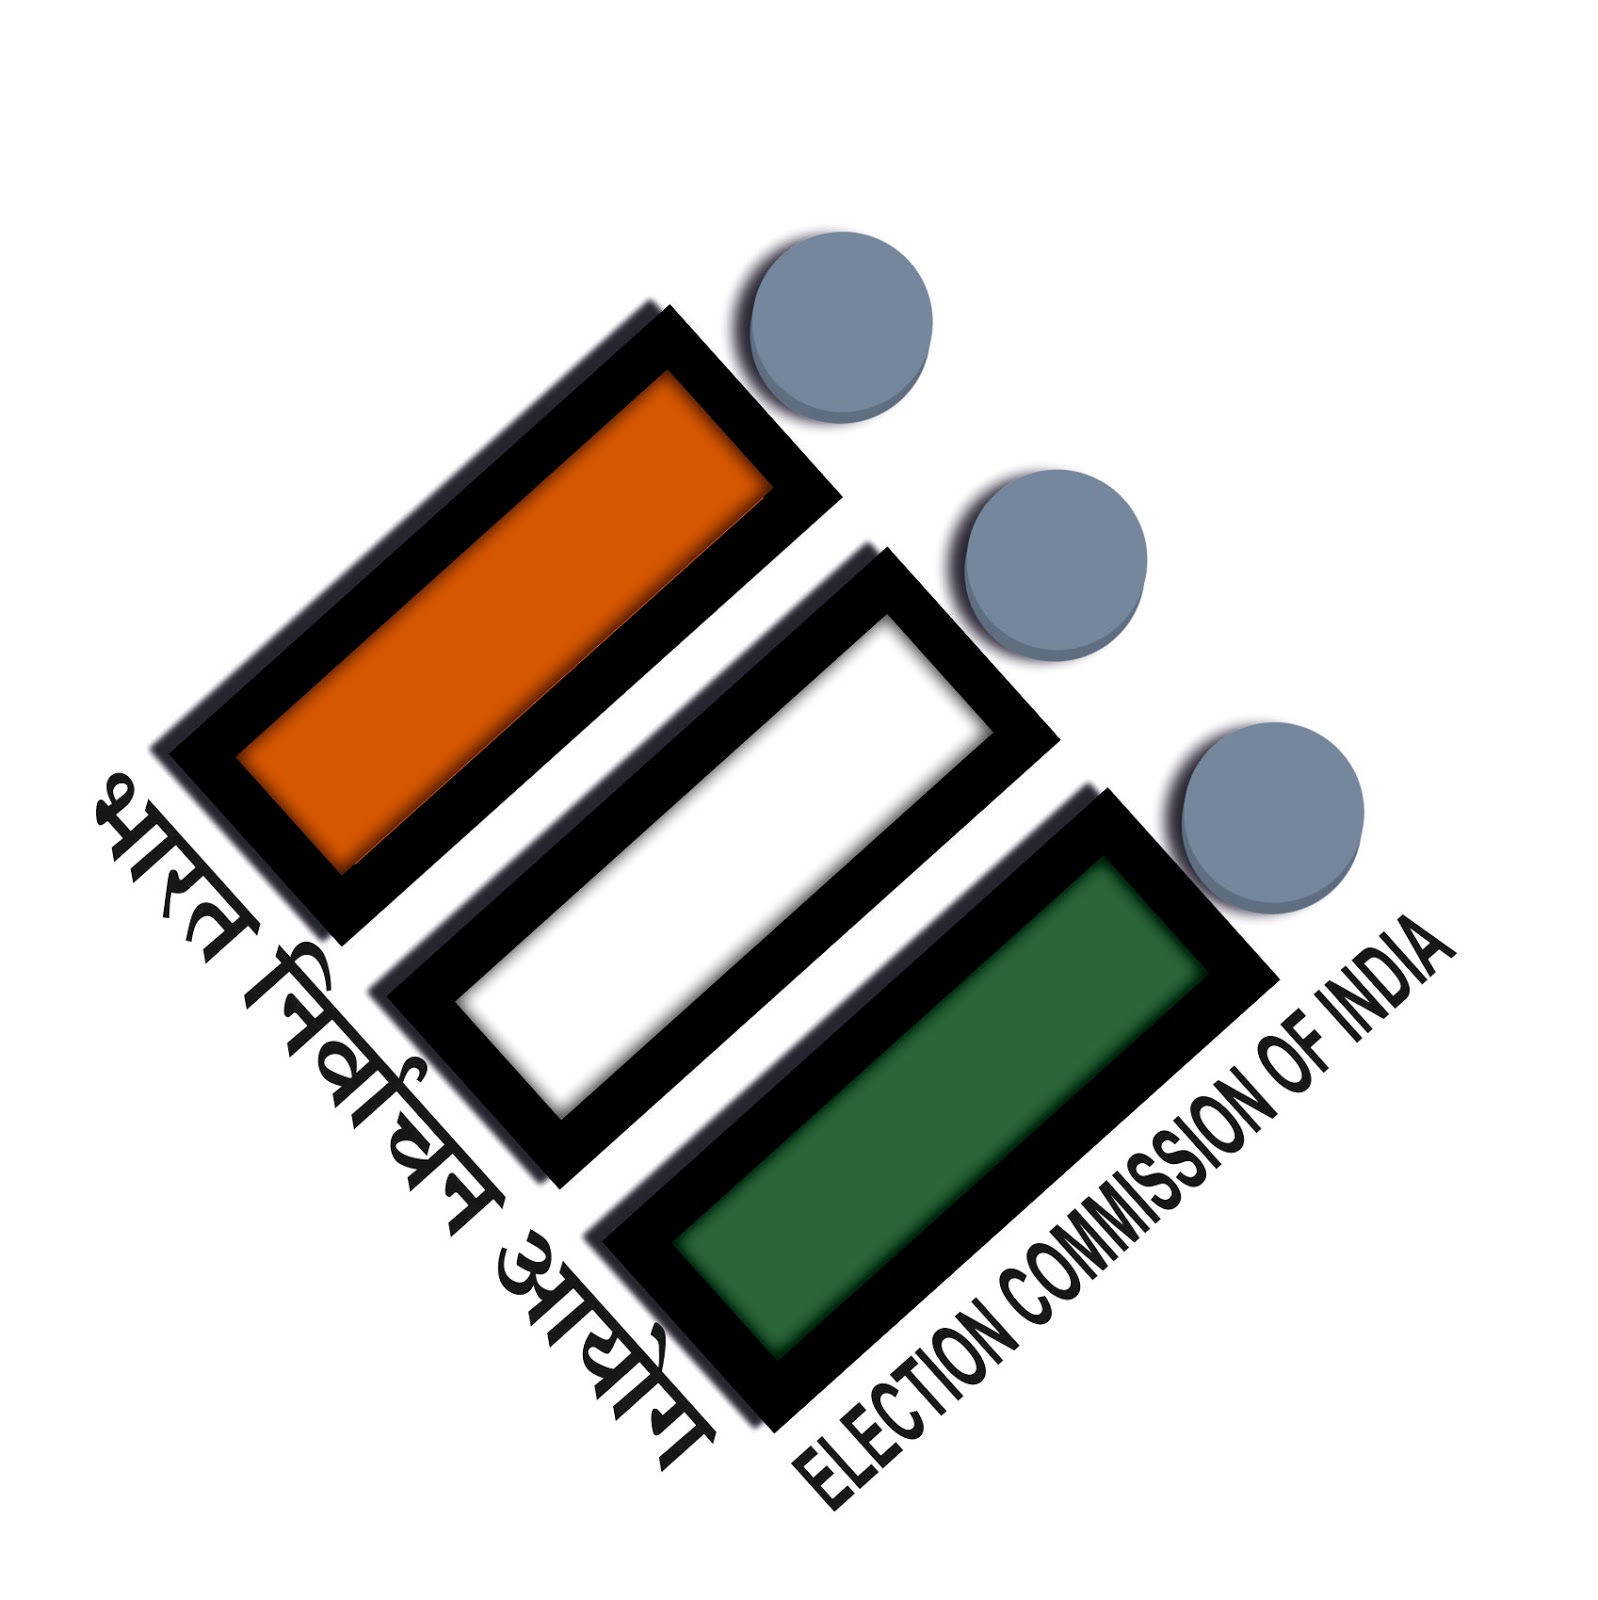 Importance and Role of Election Commission of India